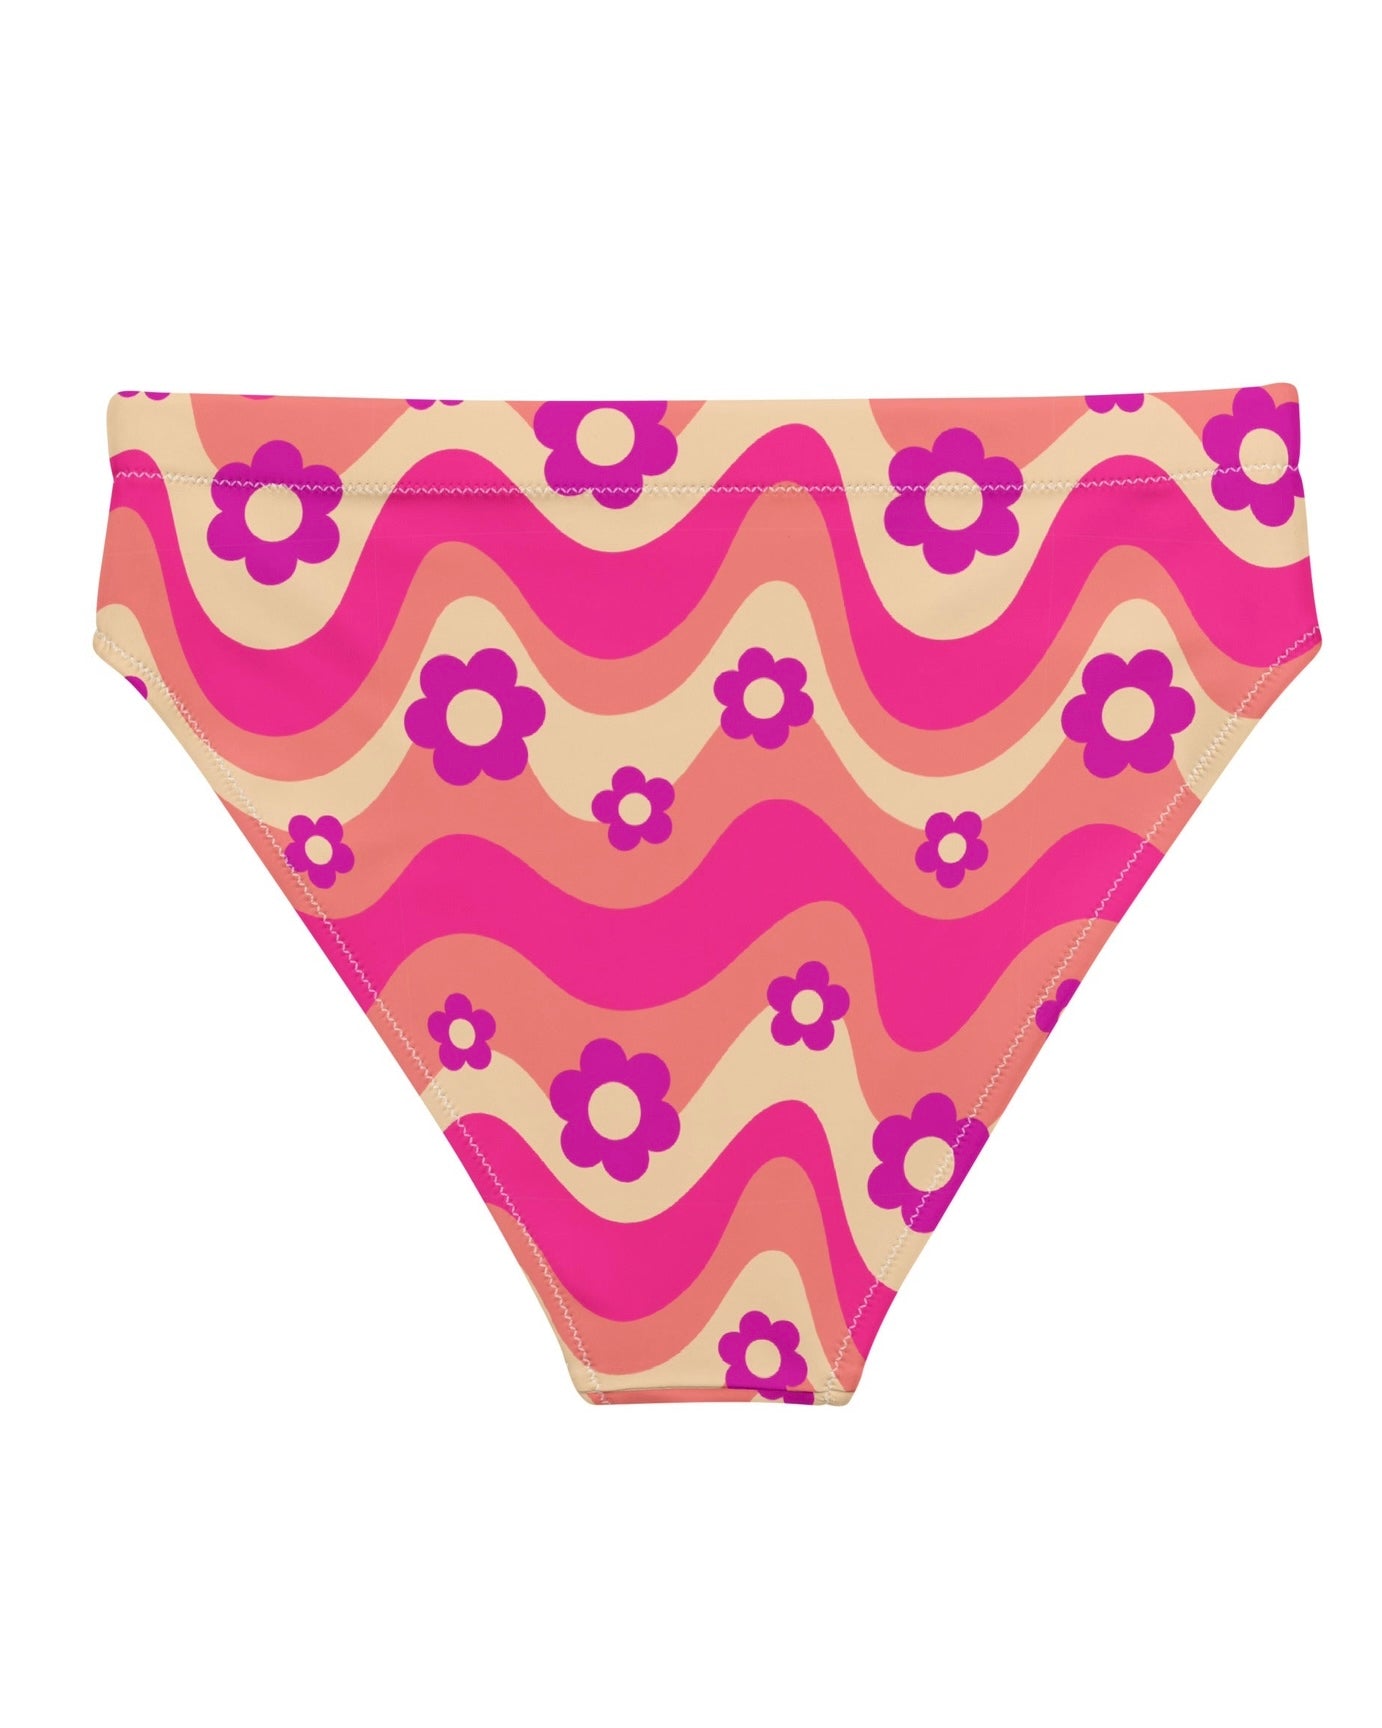 Flower Power Pink Recycled High Waisted Bottoms, High-Waisted Bottoms, - One Stop Rave